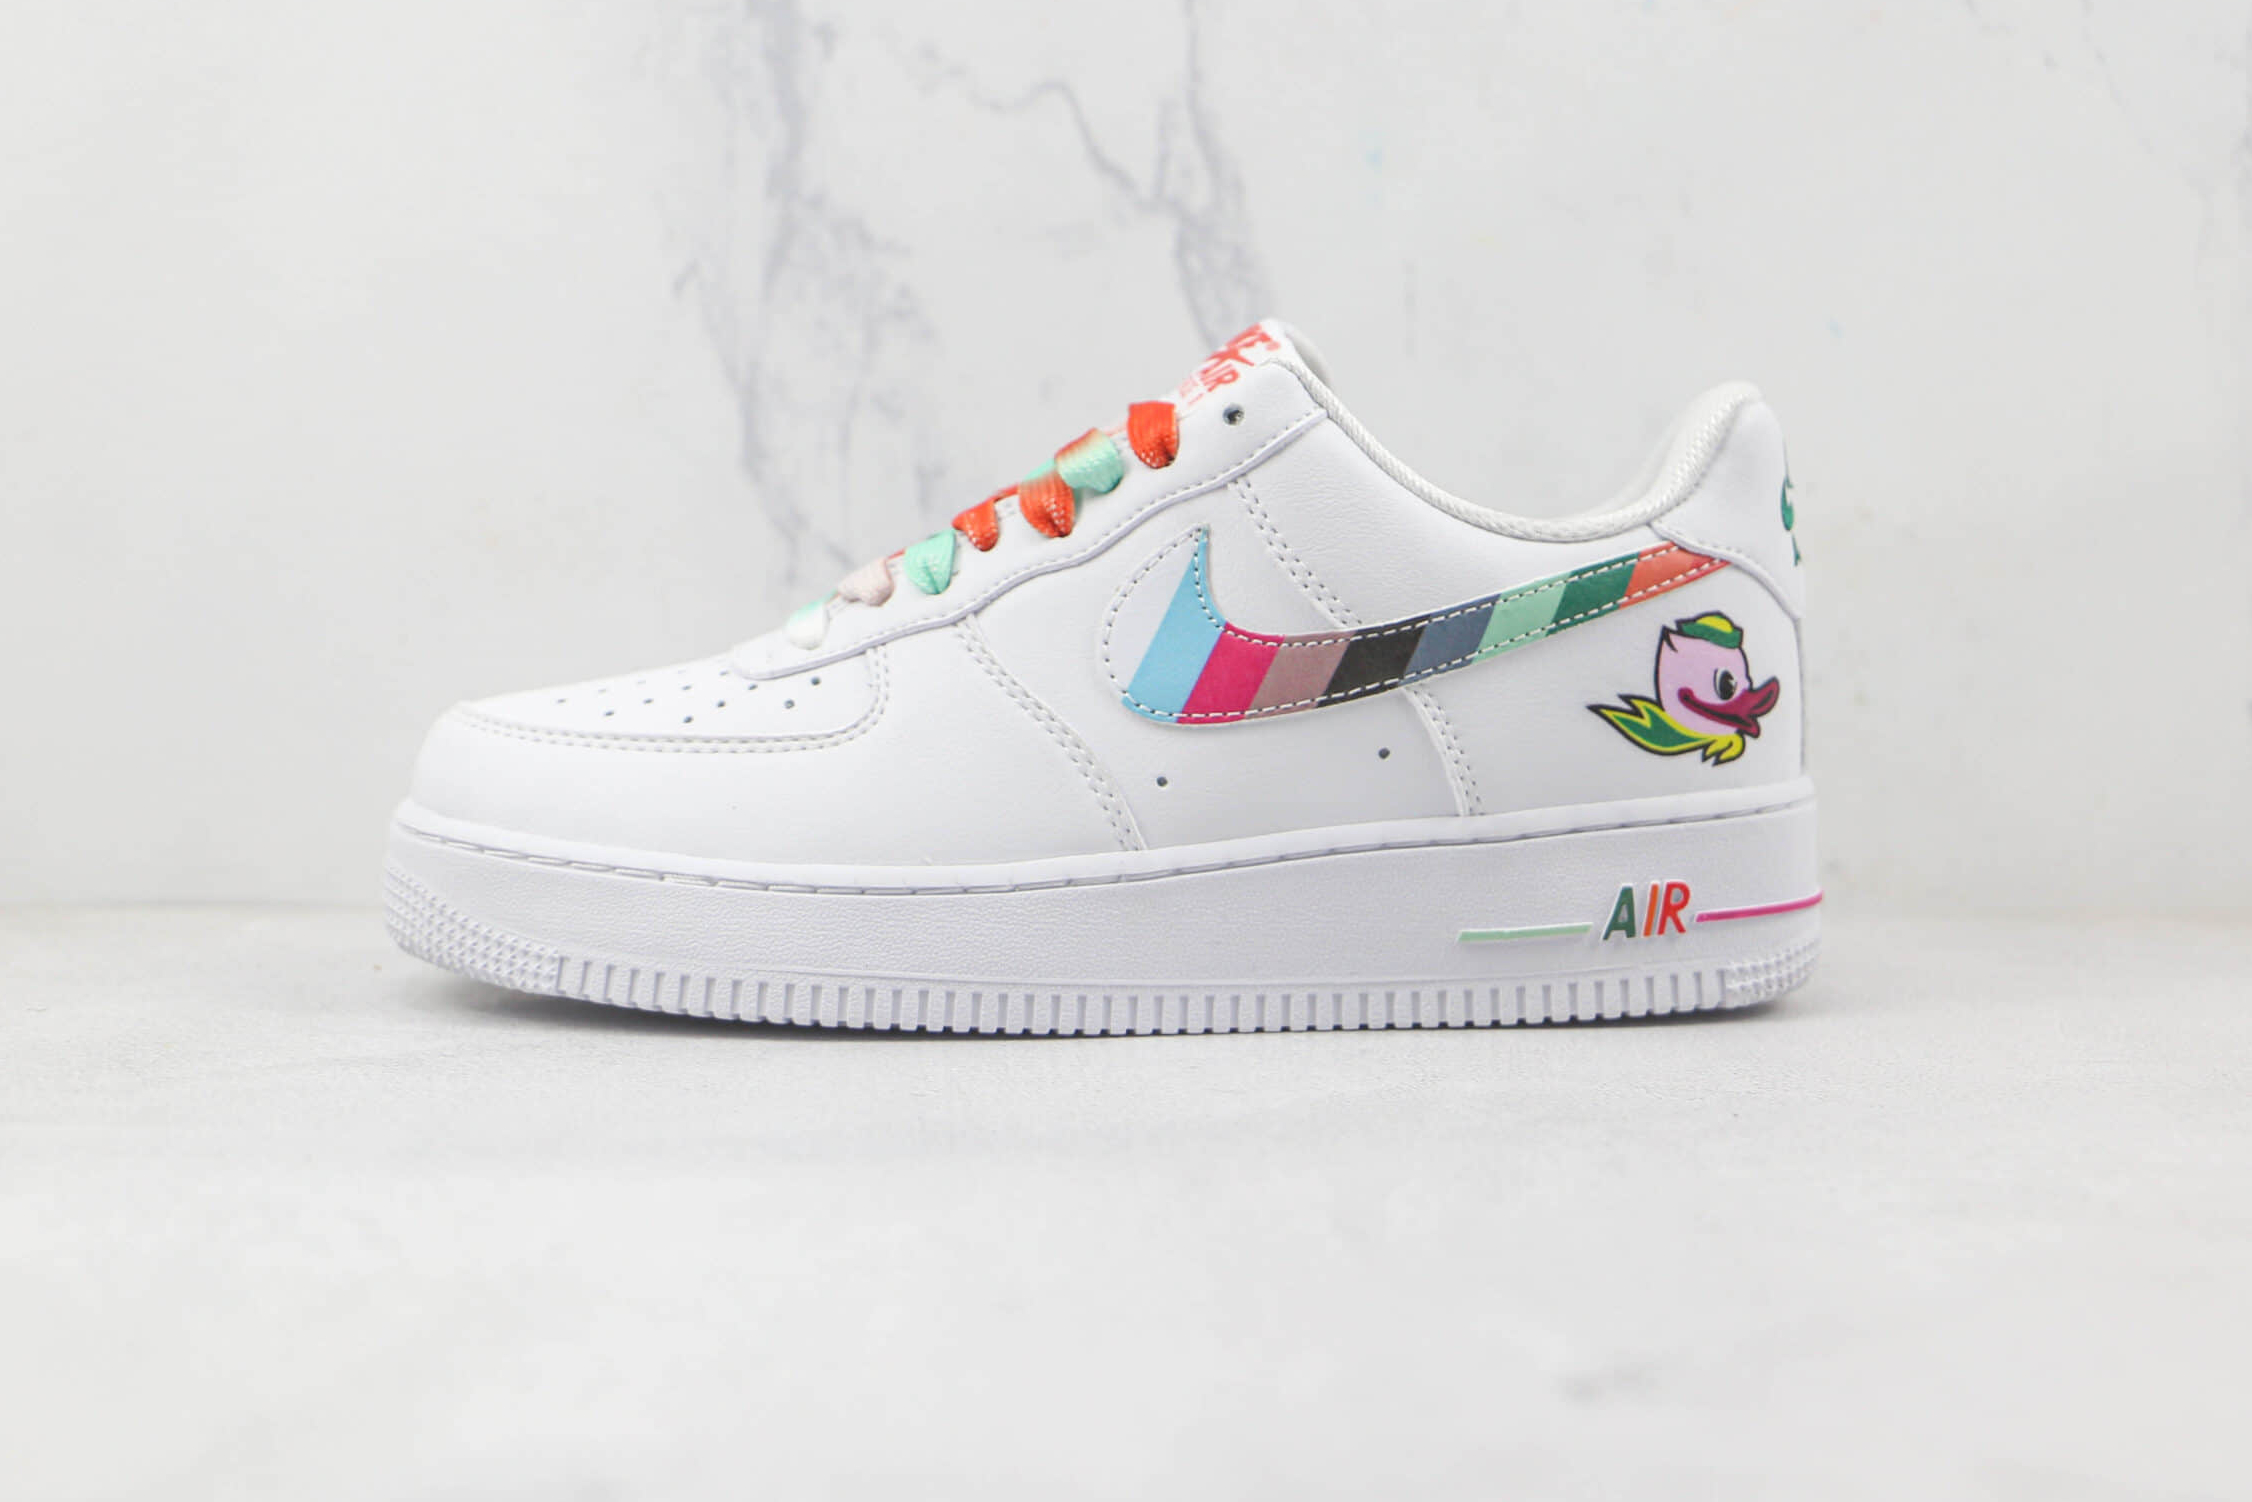 Nike Air Force 1 07 Low White Green Orange Multi-Color DH9595-100 – Stylish and Colorful Sneakers